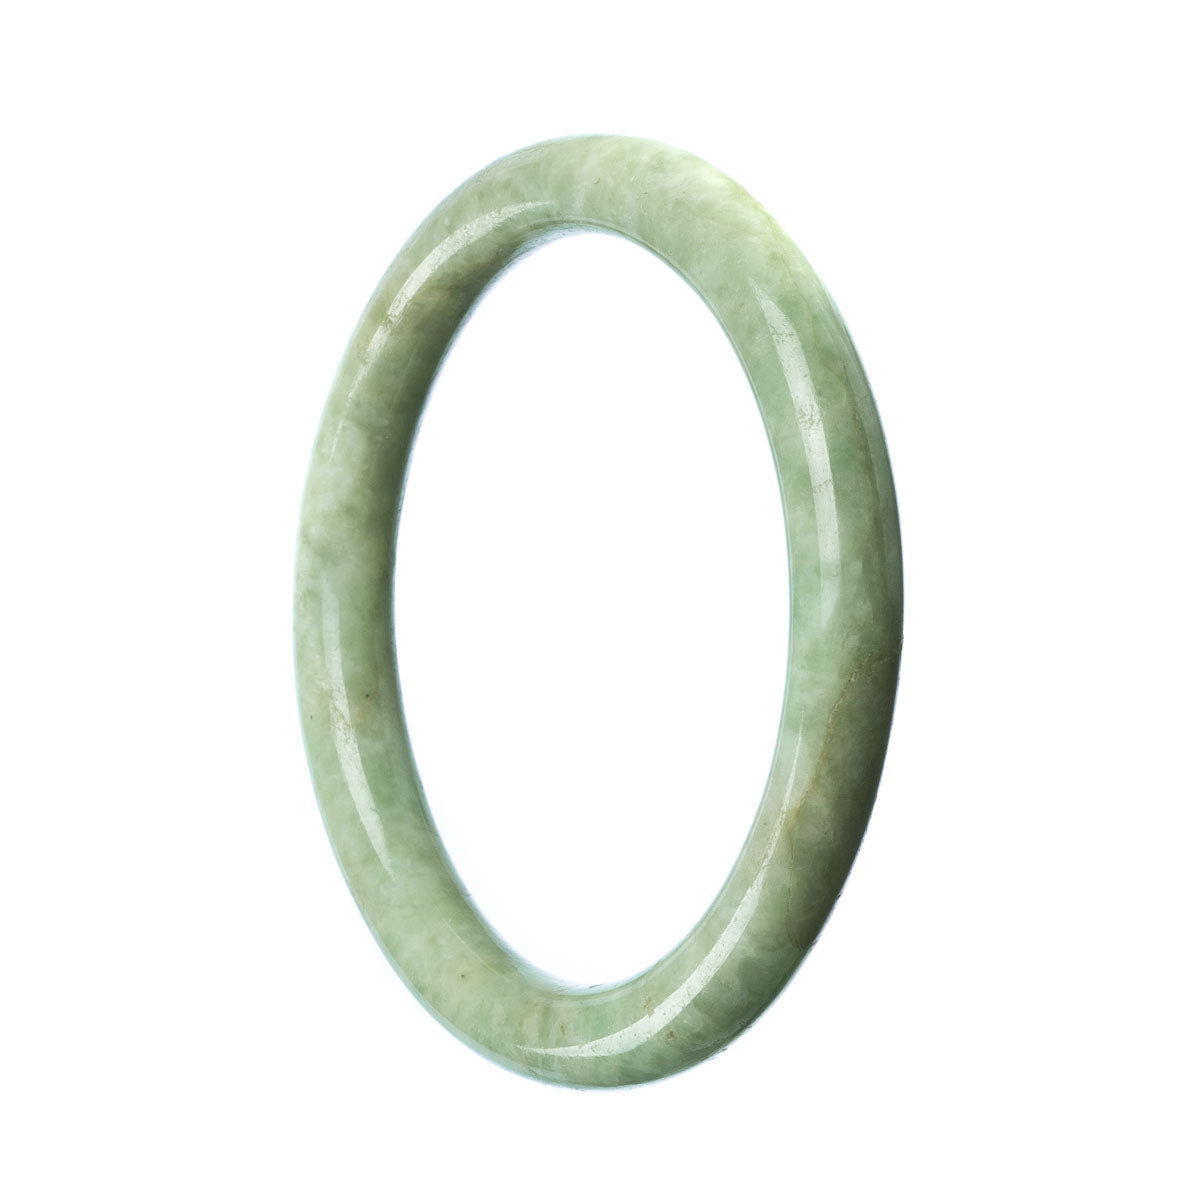 A round, certified natural green jadeite bracelet with a 59mm diameter, made by MAYS GEMS.